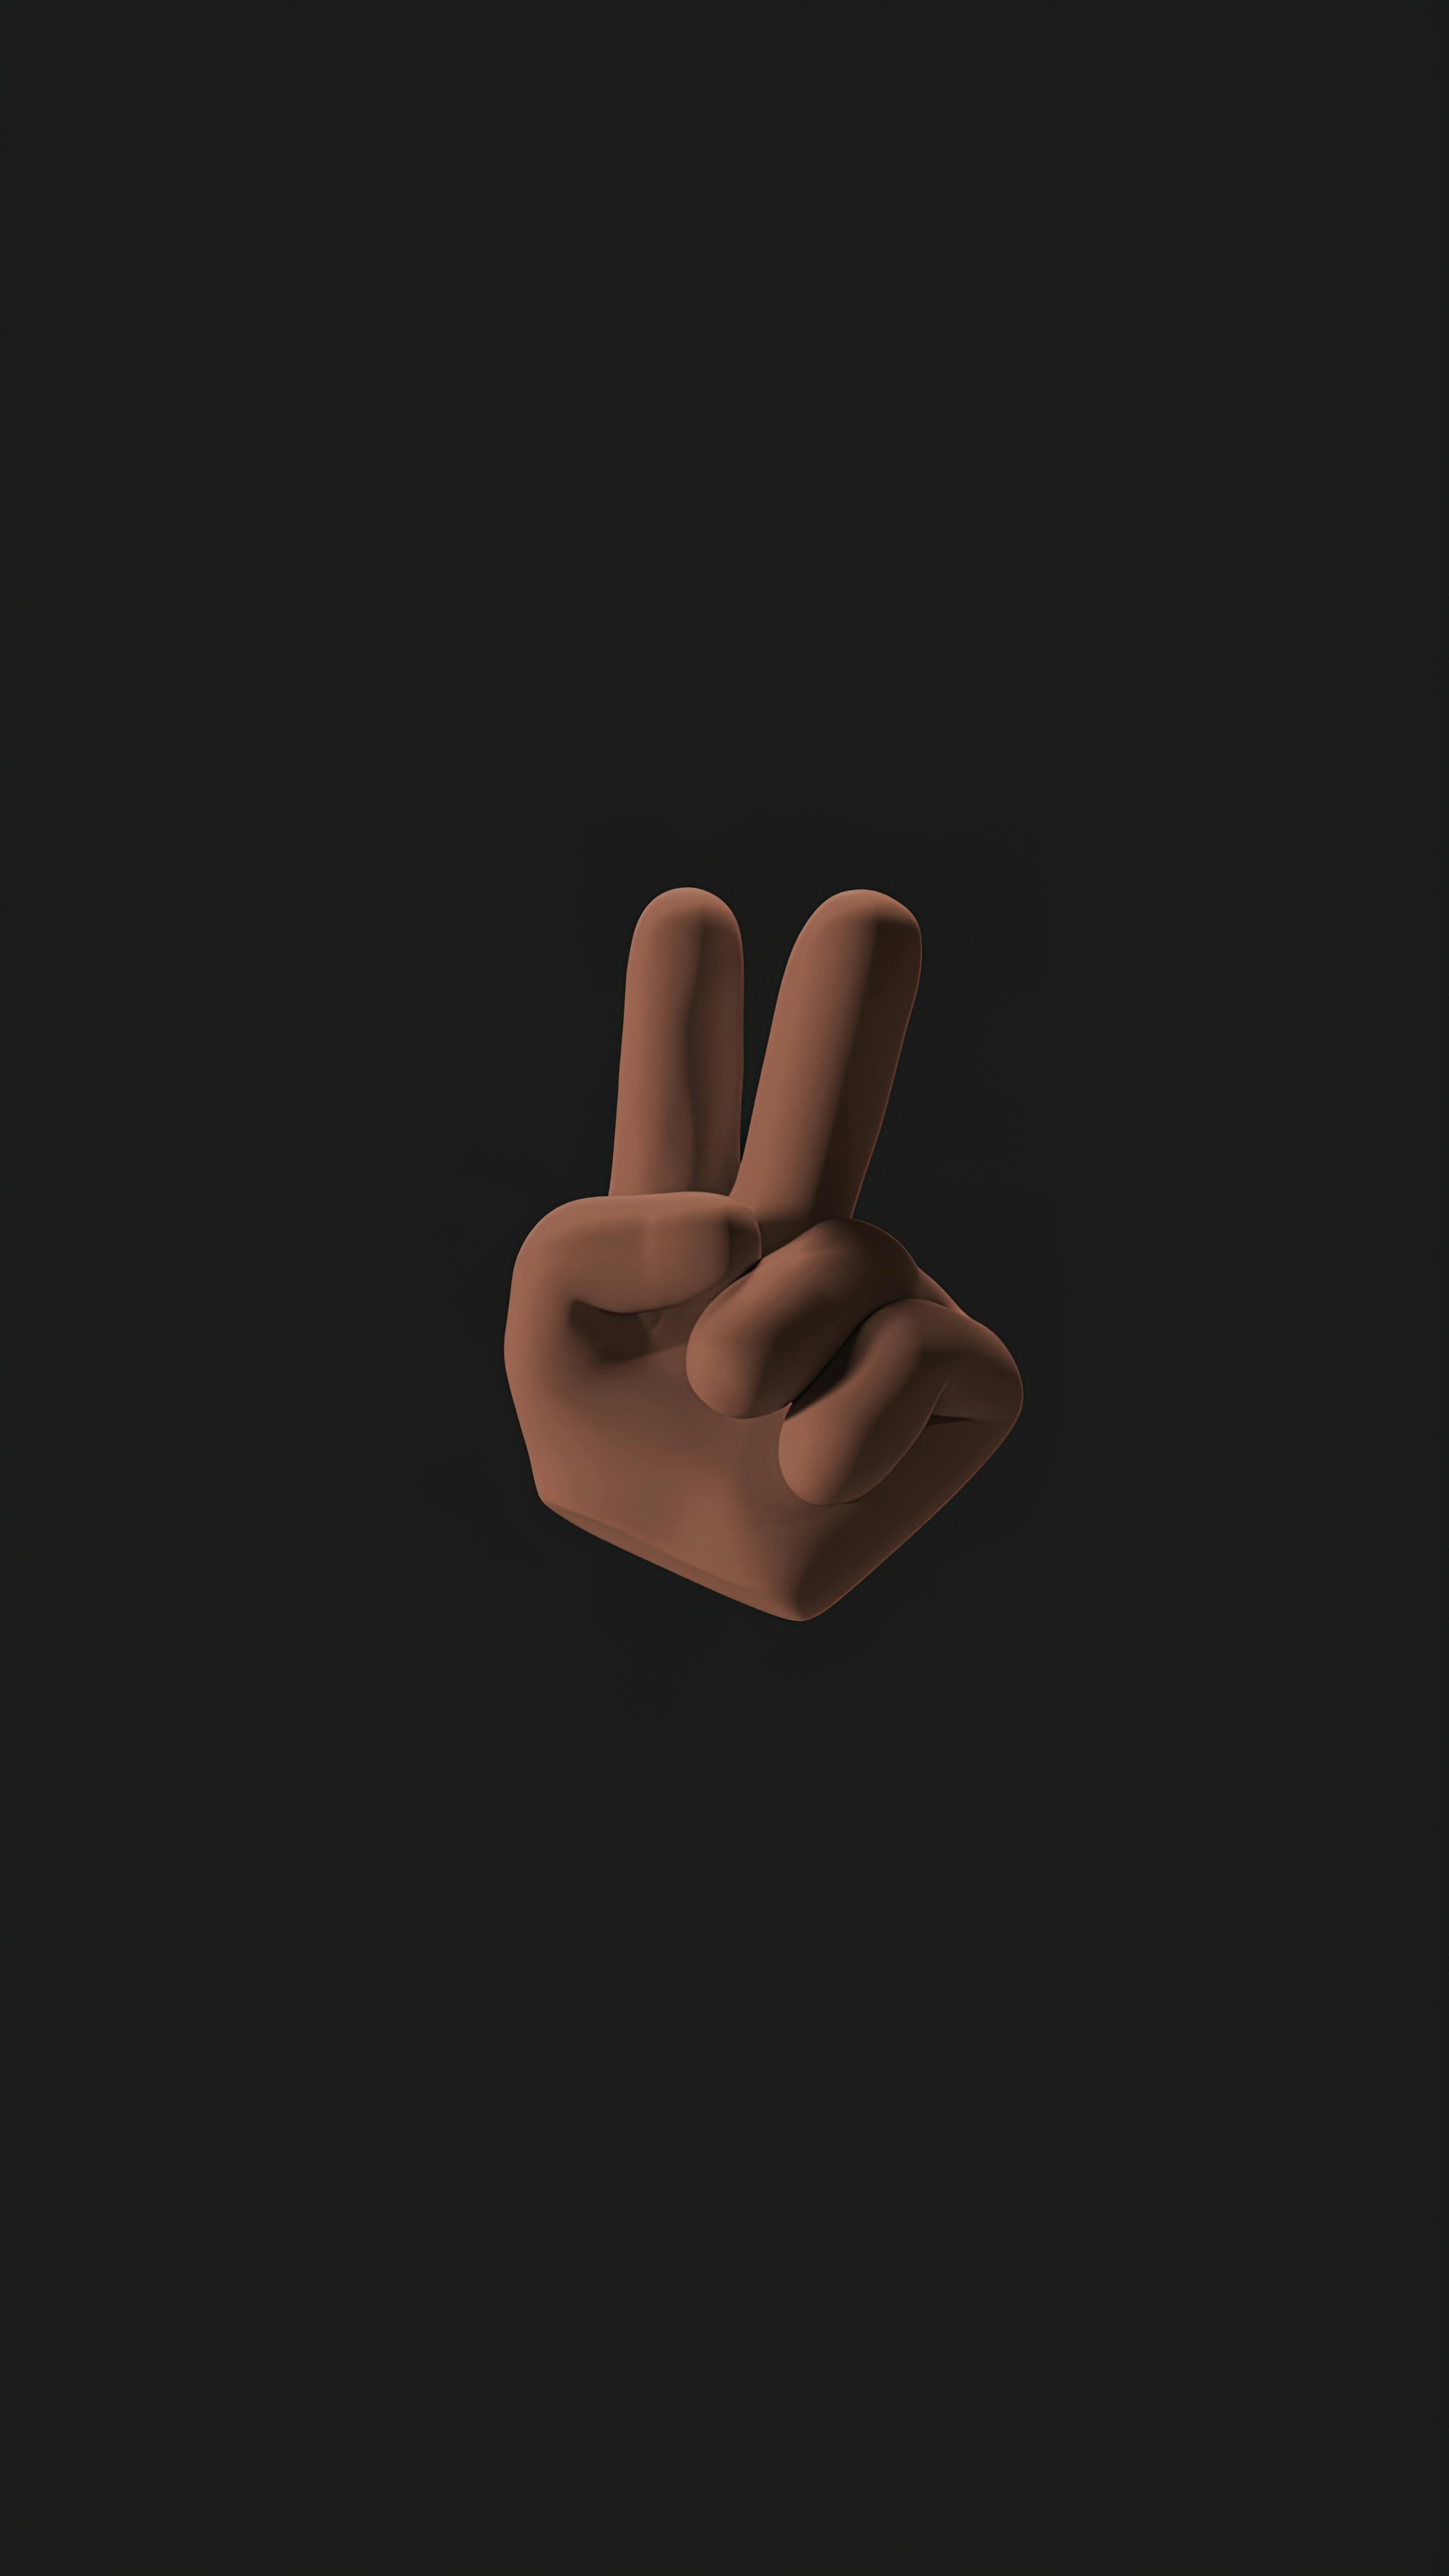 An Animation of a Hand Doing Peace Sign on a Black Background · Free Stock  Photo